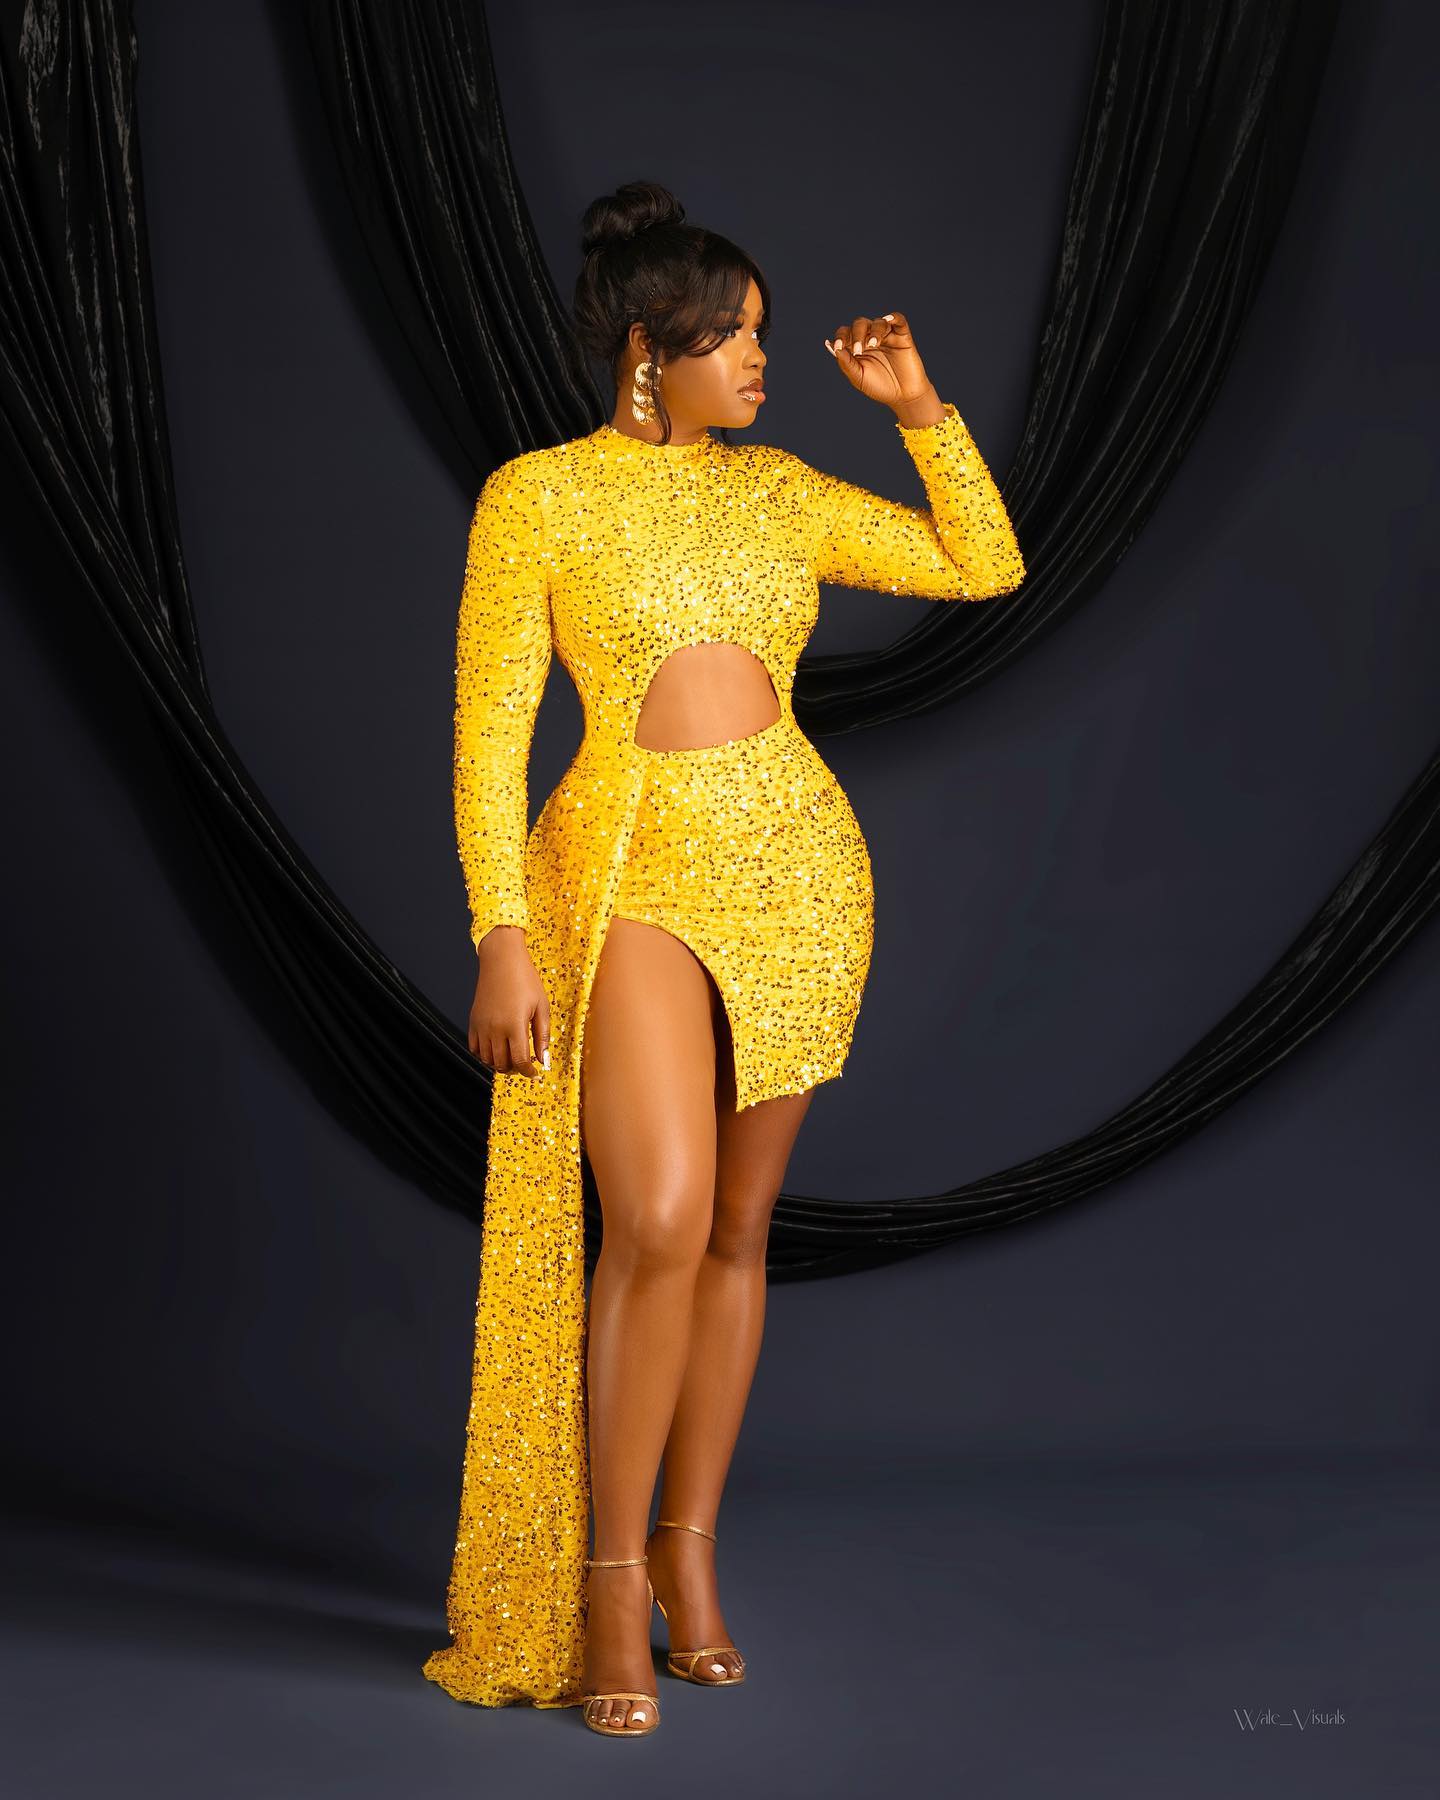  Christiana Kayode- Giving The Party Vibe In A Yellow Two Piece